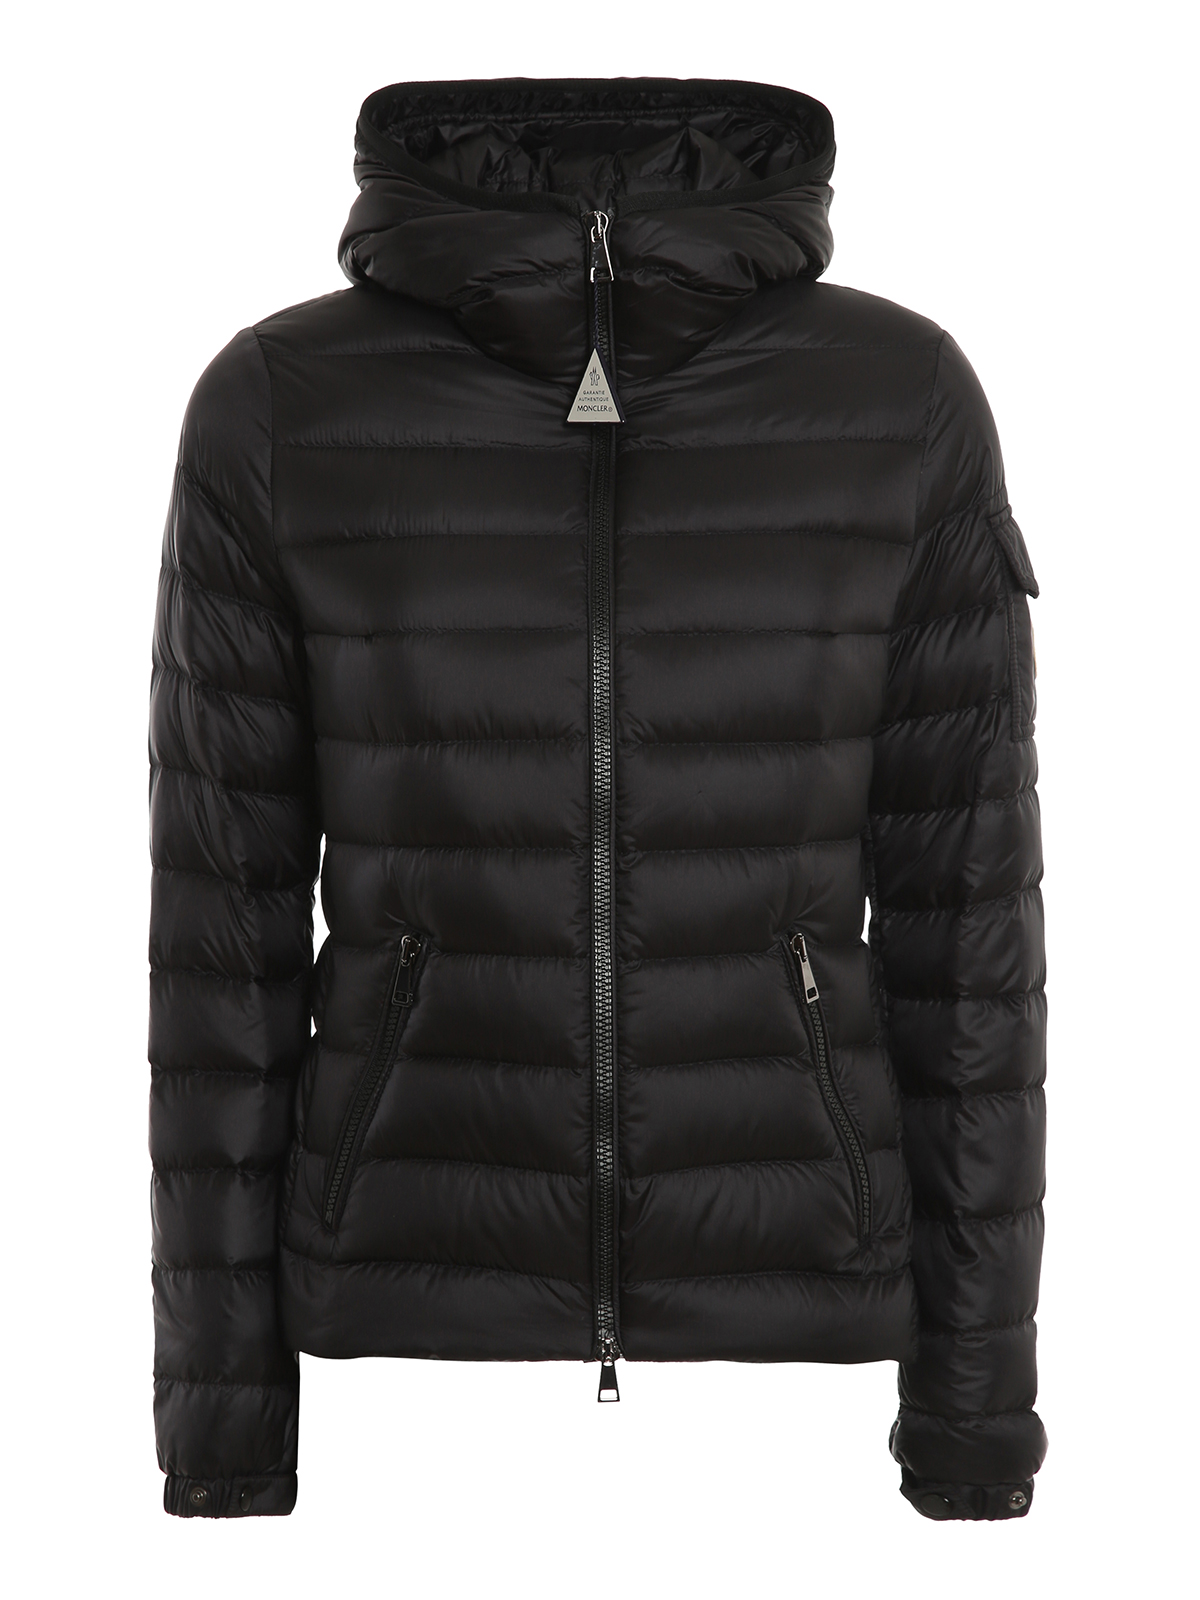 Moncler Ladies Black Quilted Puffer Jacket